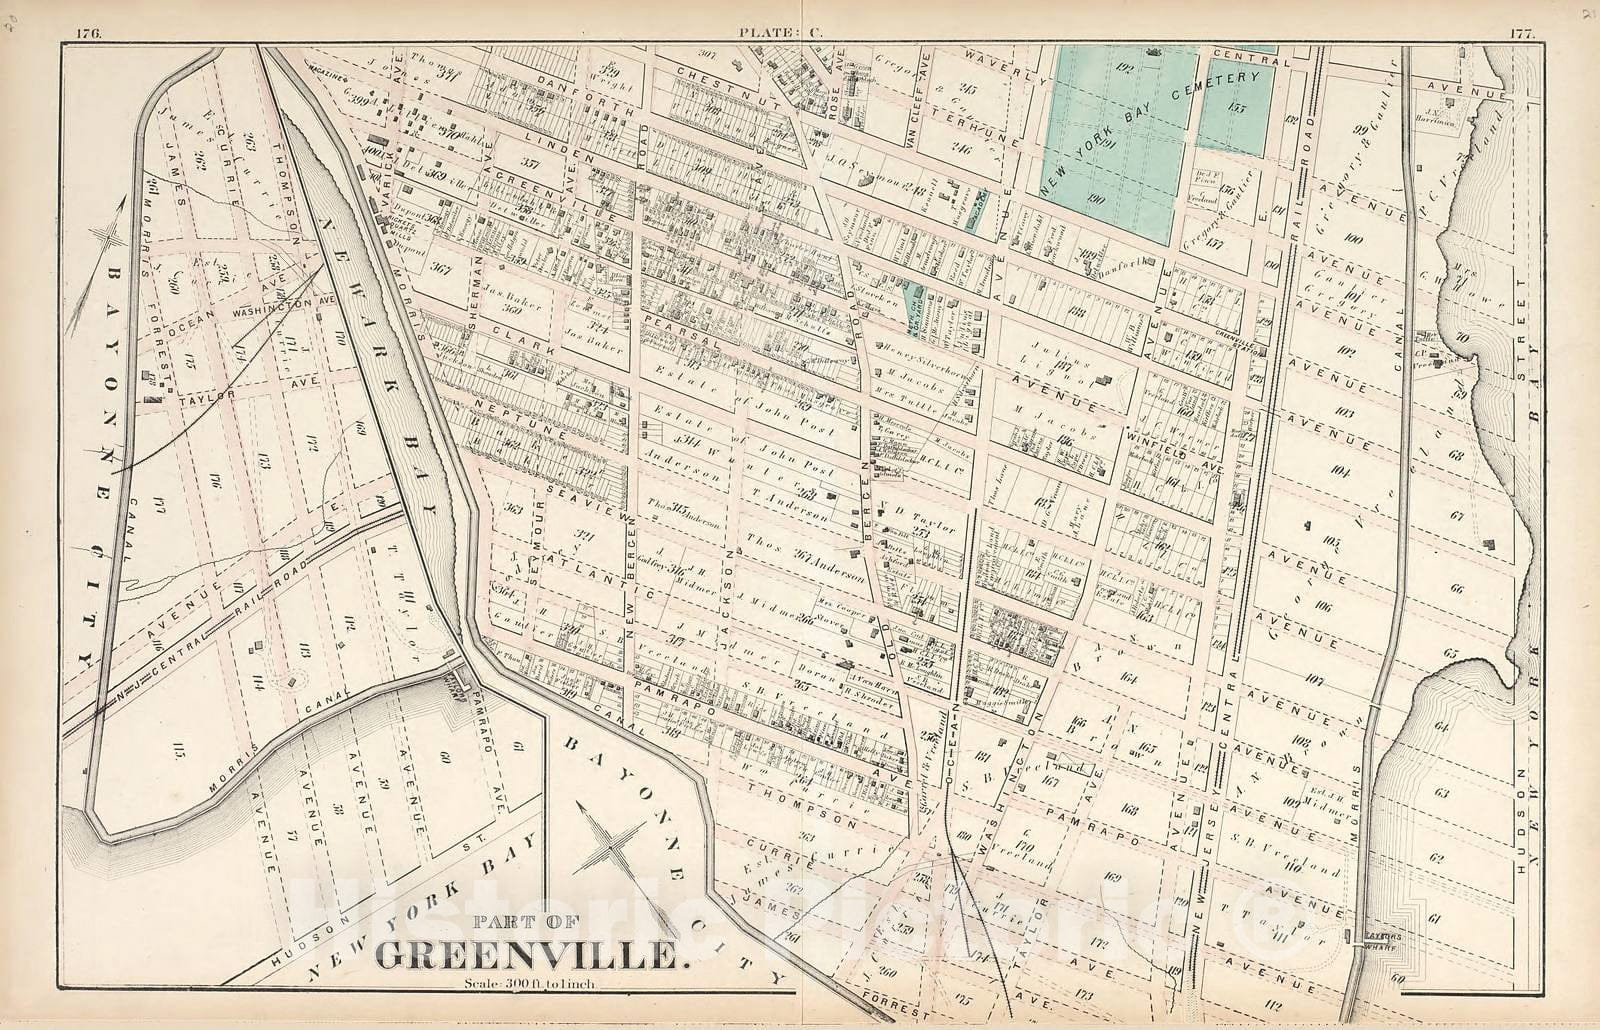 Historic 1873 Map - Combined Atlas of The State of New Jersey - Greenville - 3 - Atlas of The Late Township of Greenville